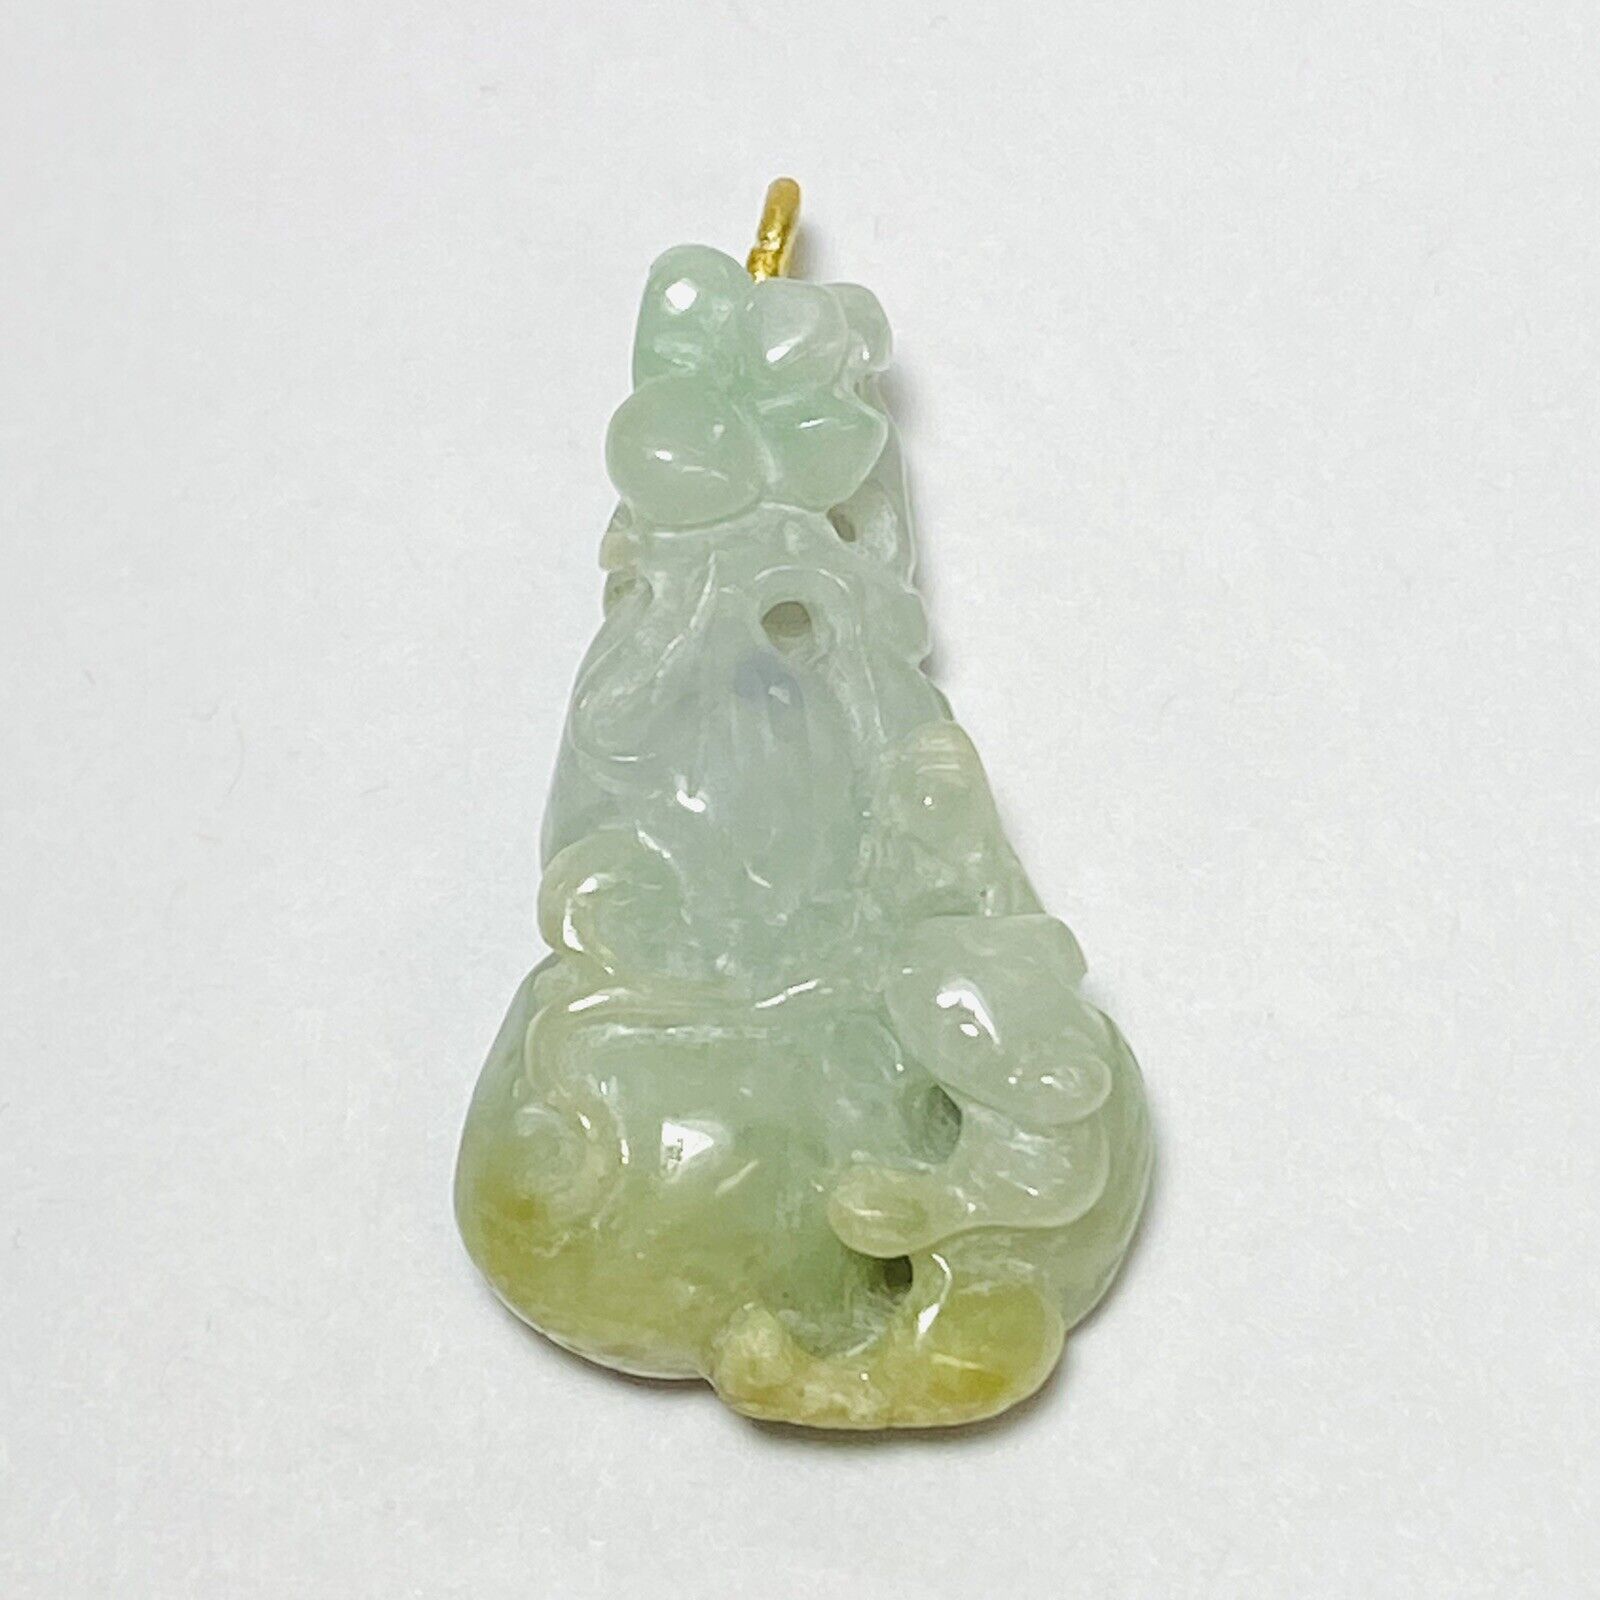 22K Yellow Gold Chinese Carved Jade Rat On Gourd Fruit Flower 40mm Pendant 15.0g